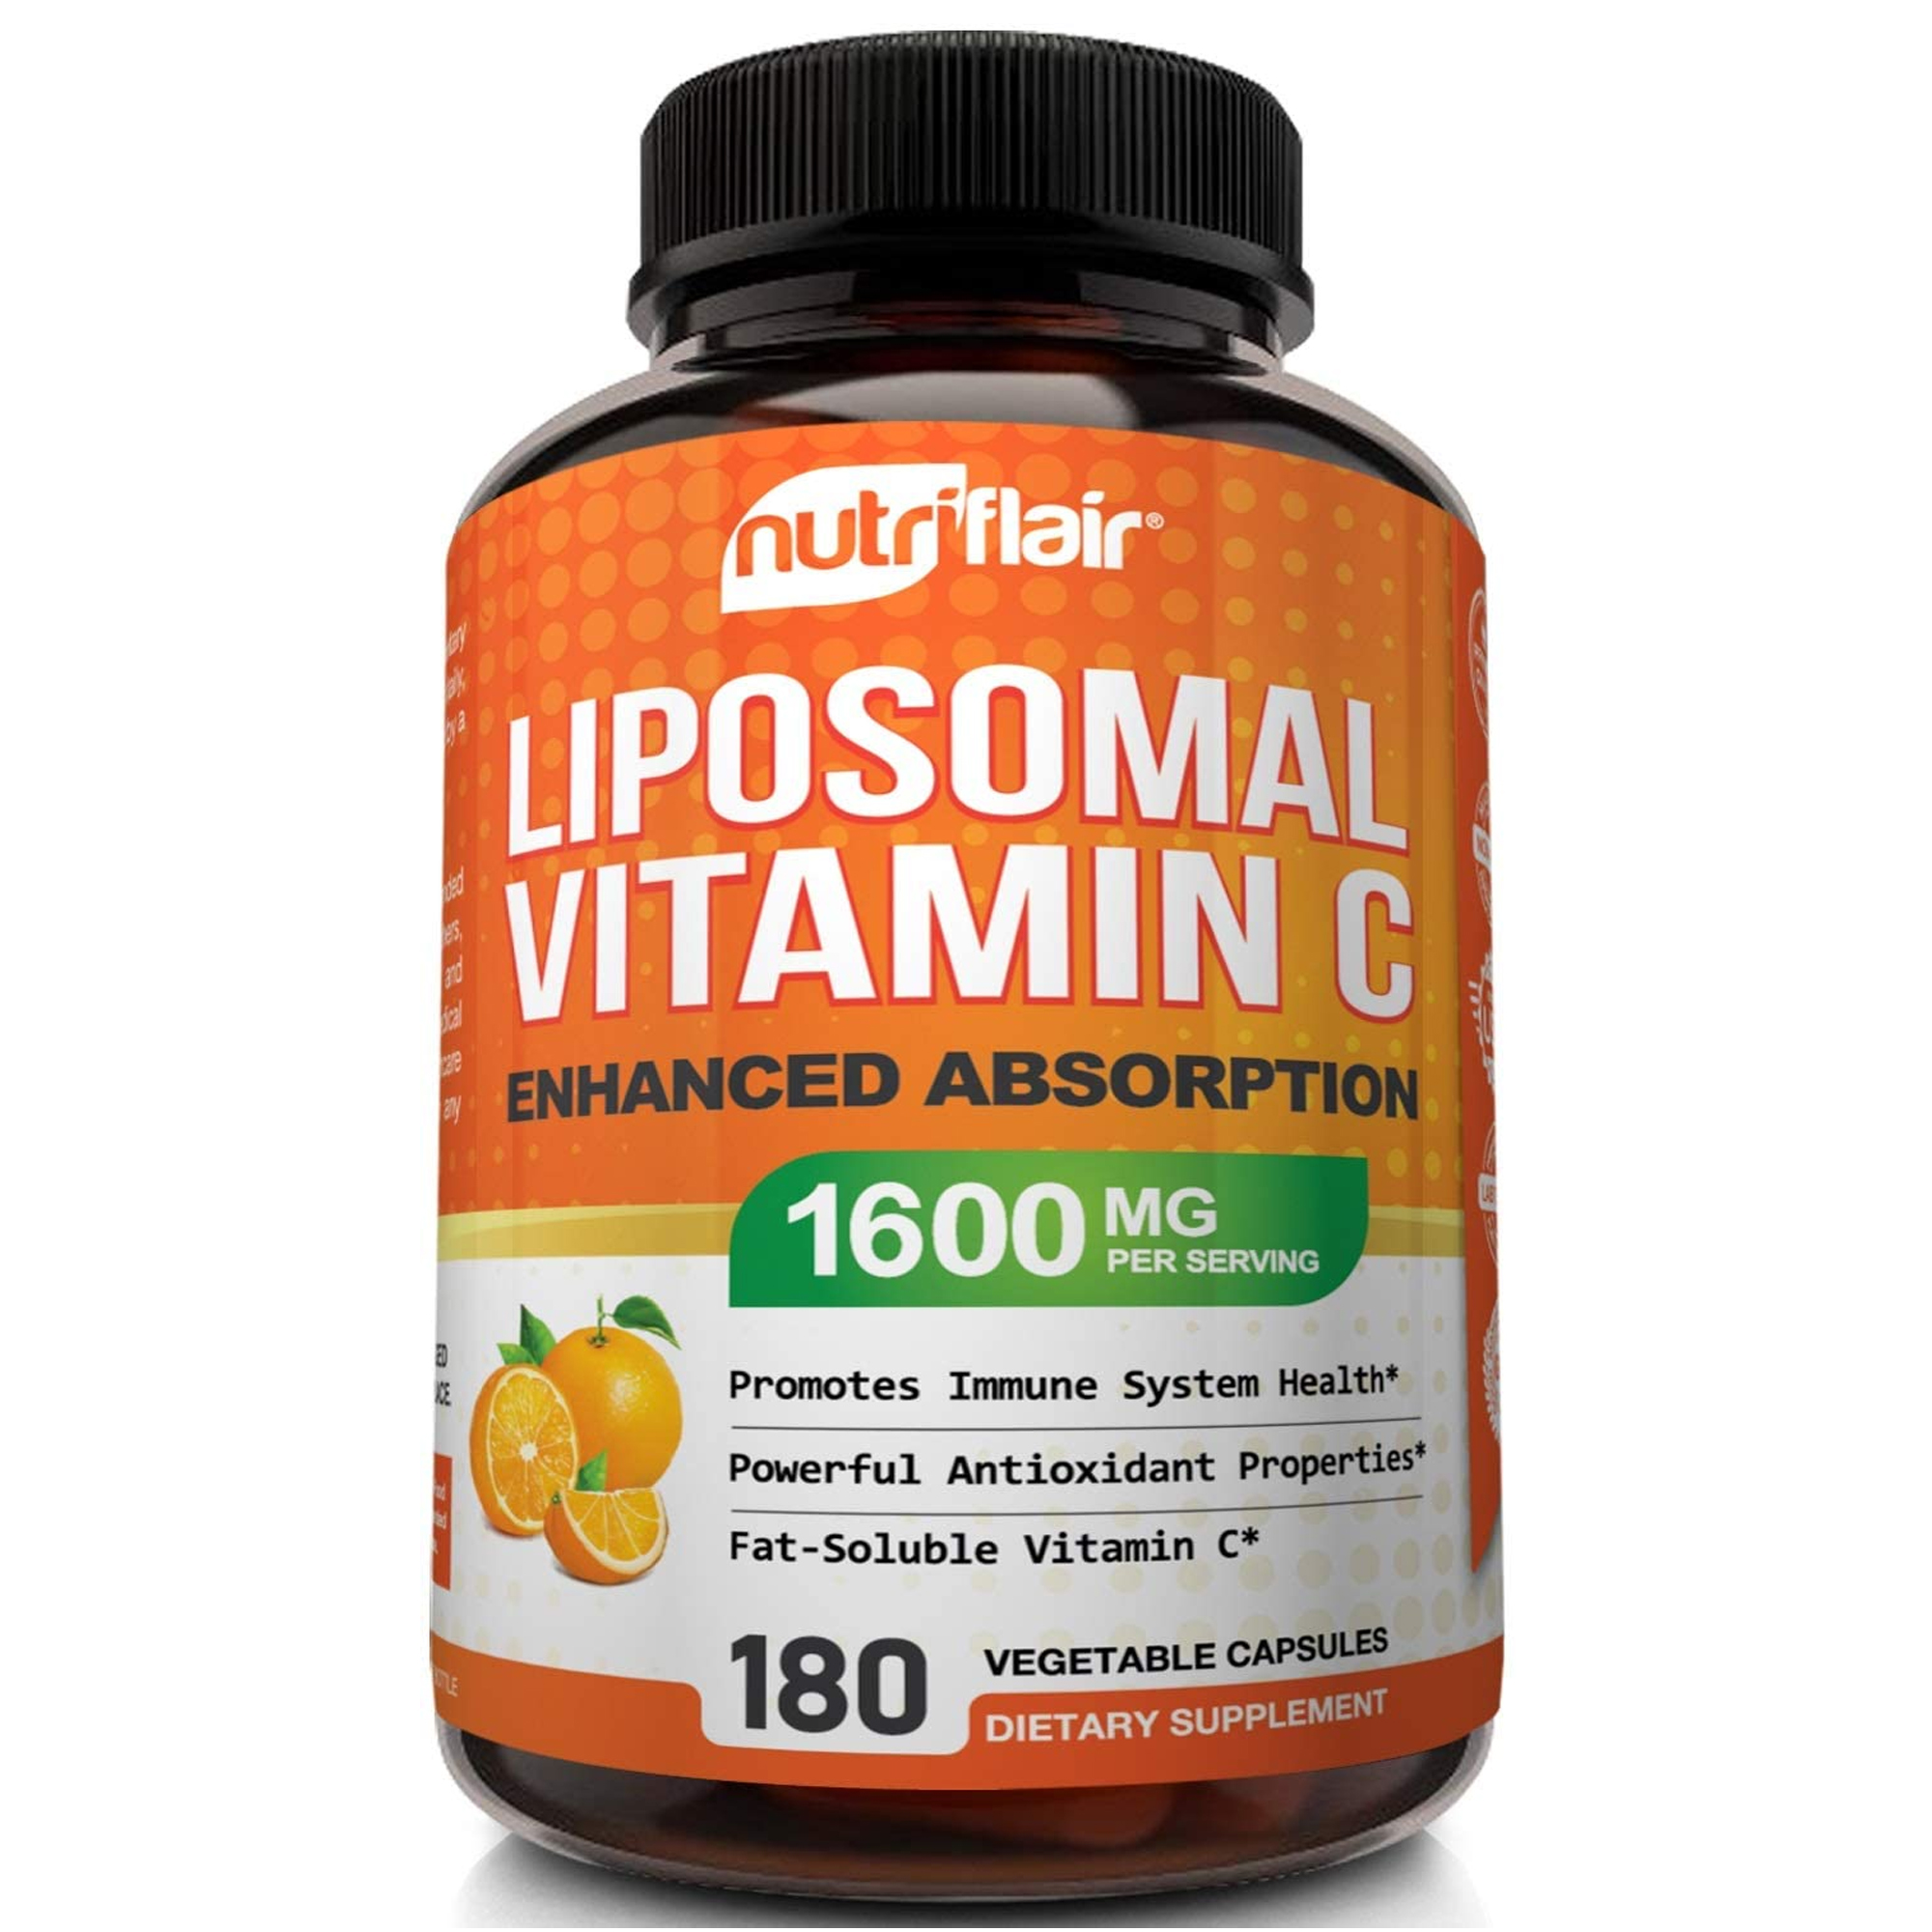 NutriFlair Liposomal Vitamin C 1600mg, 180 Capsules - High Absorption, Fat Soluble VIT C, Antioxidant Supplement, Higher Bioavailability Immune System Support & Collagen Booster, Non-GMO, Vegan Pills - image 4 of 7